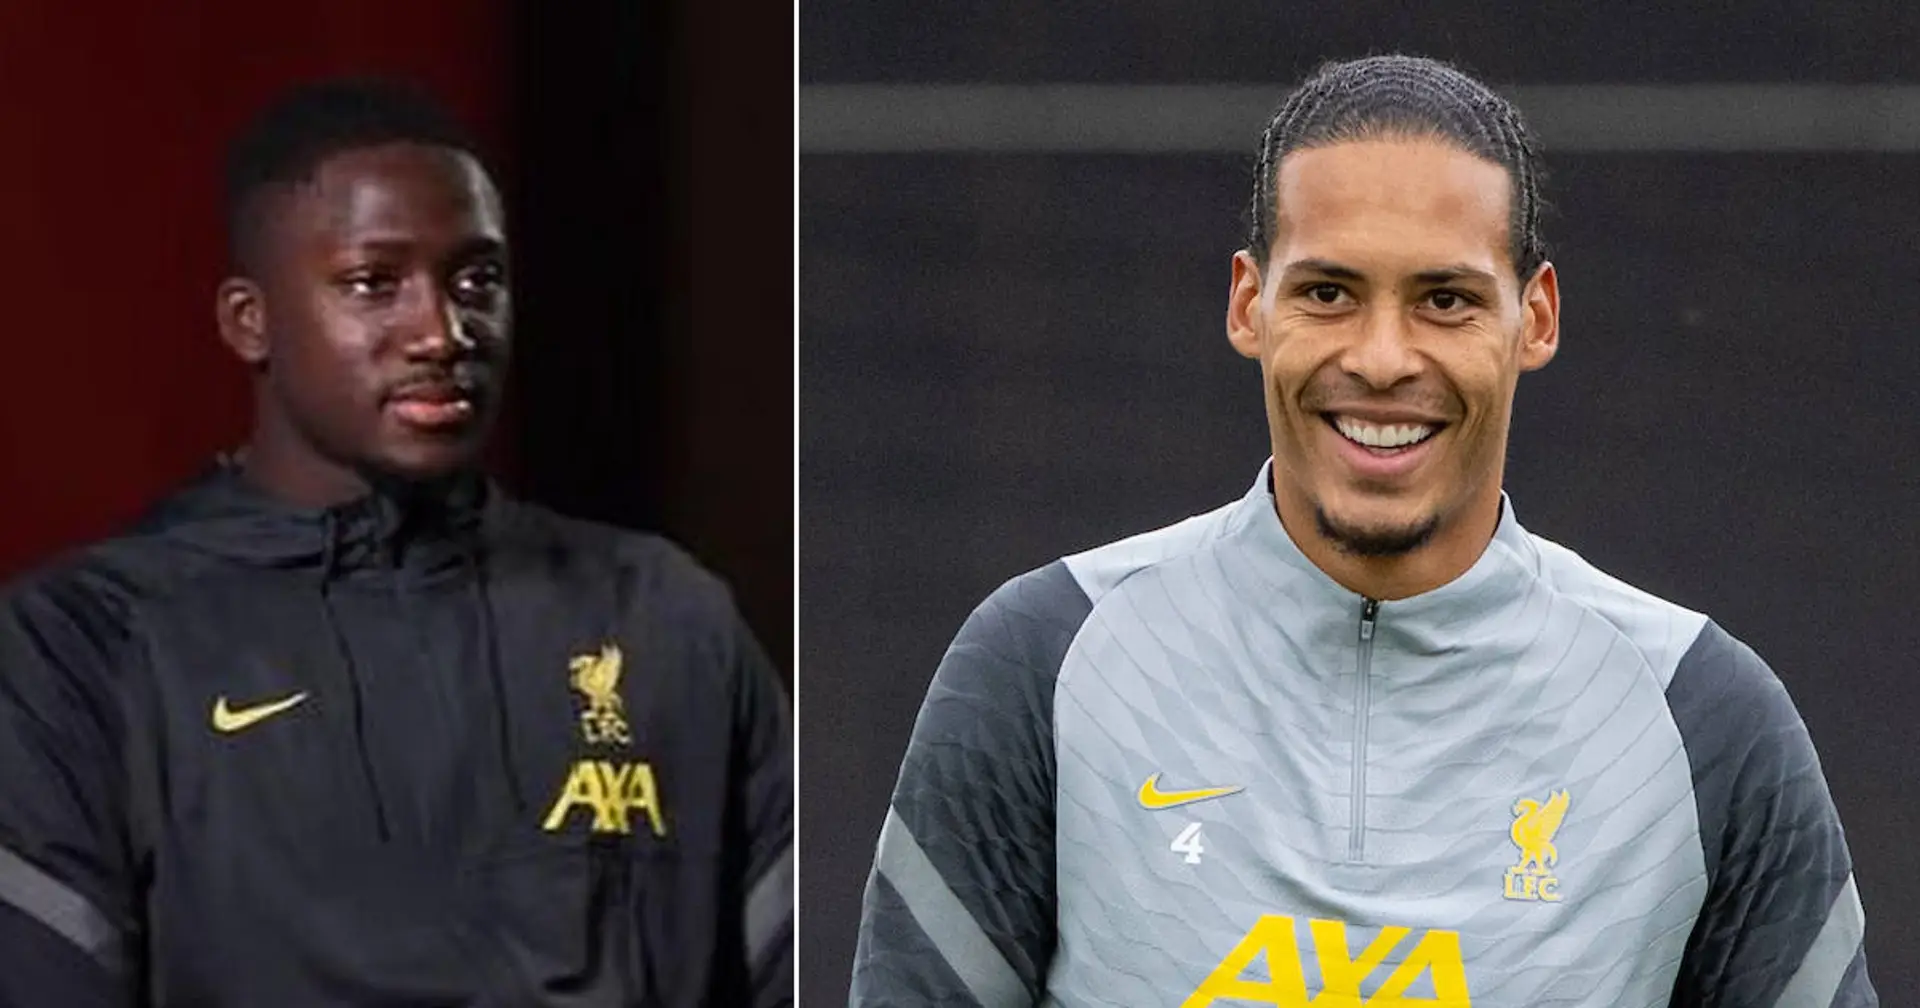 'I hope with time': Konate wants to reach Van Dijk level